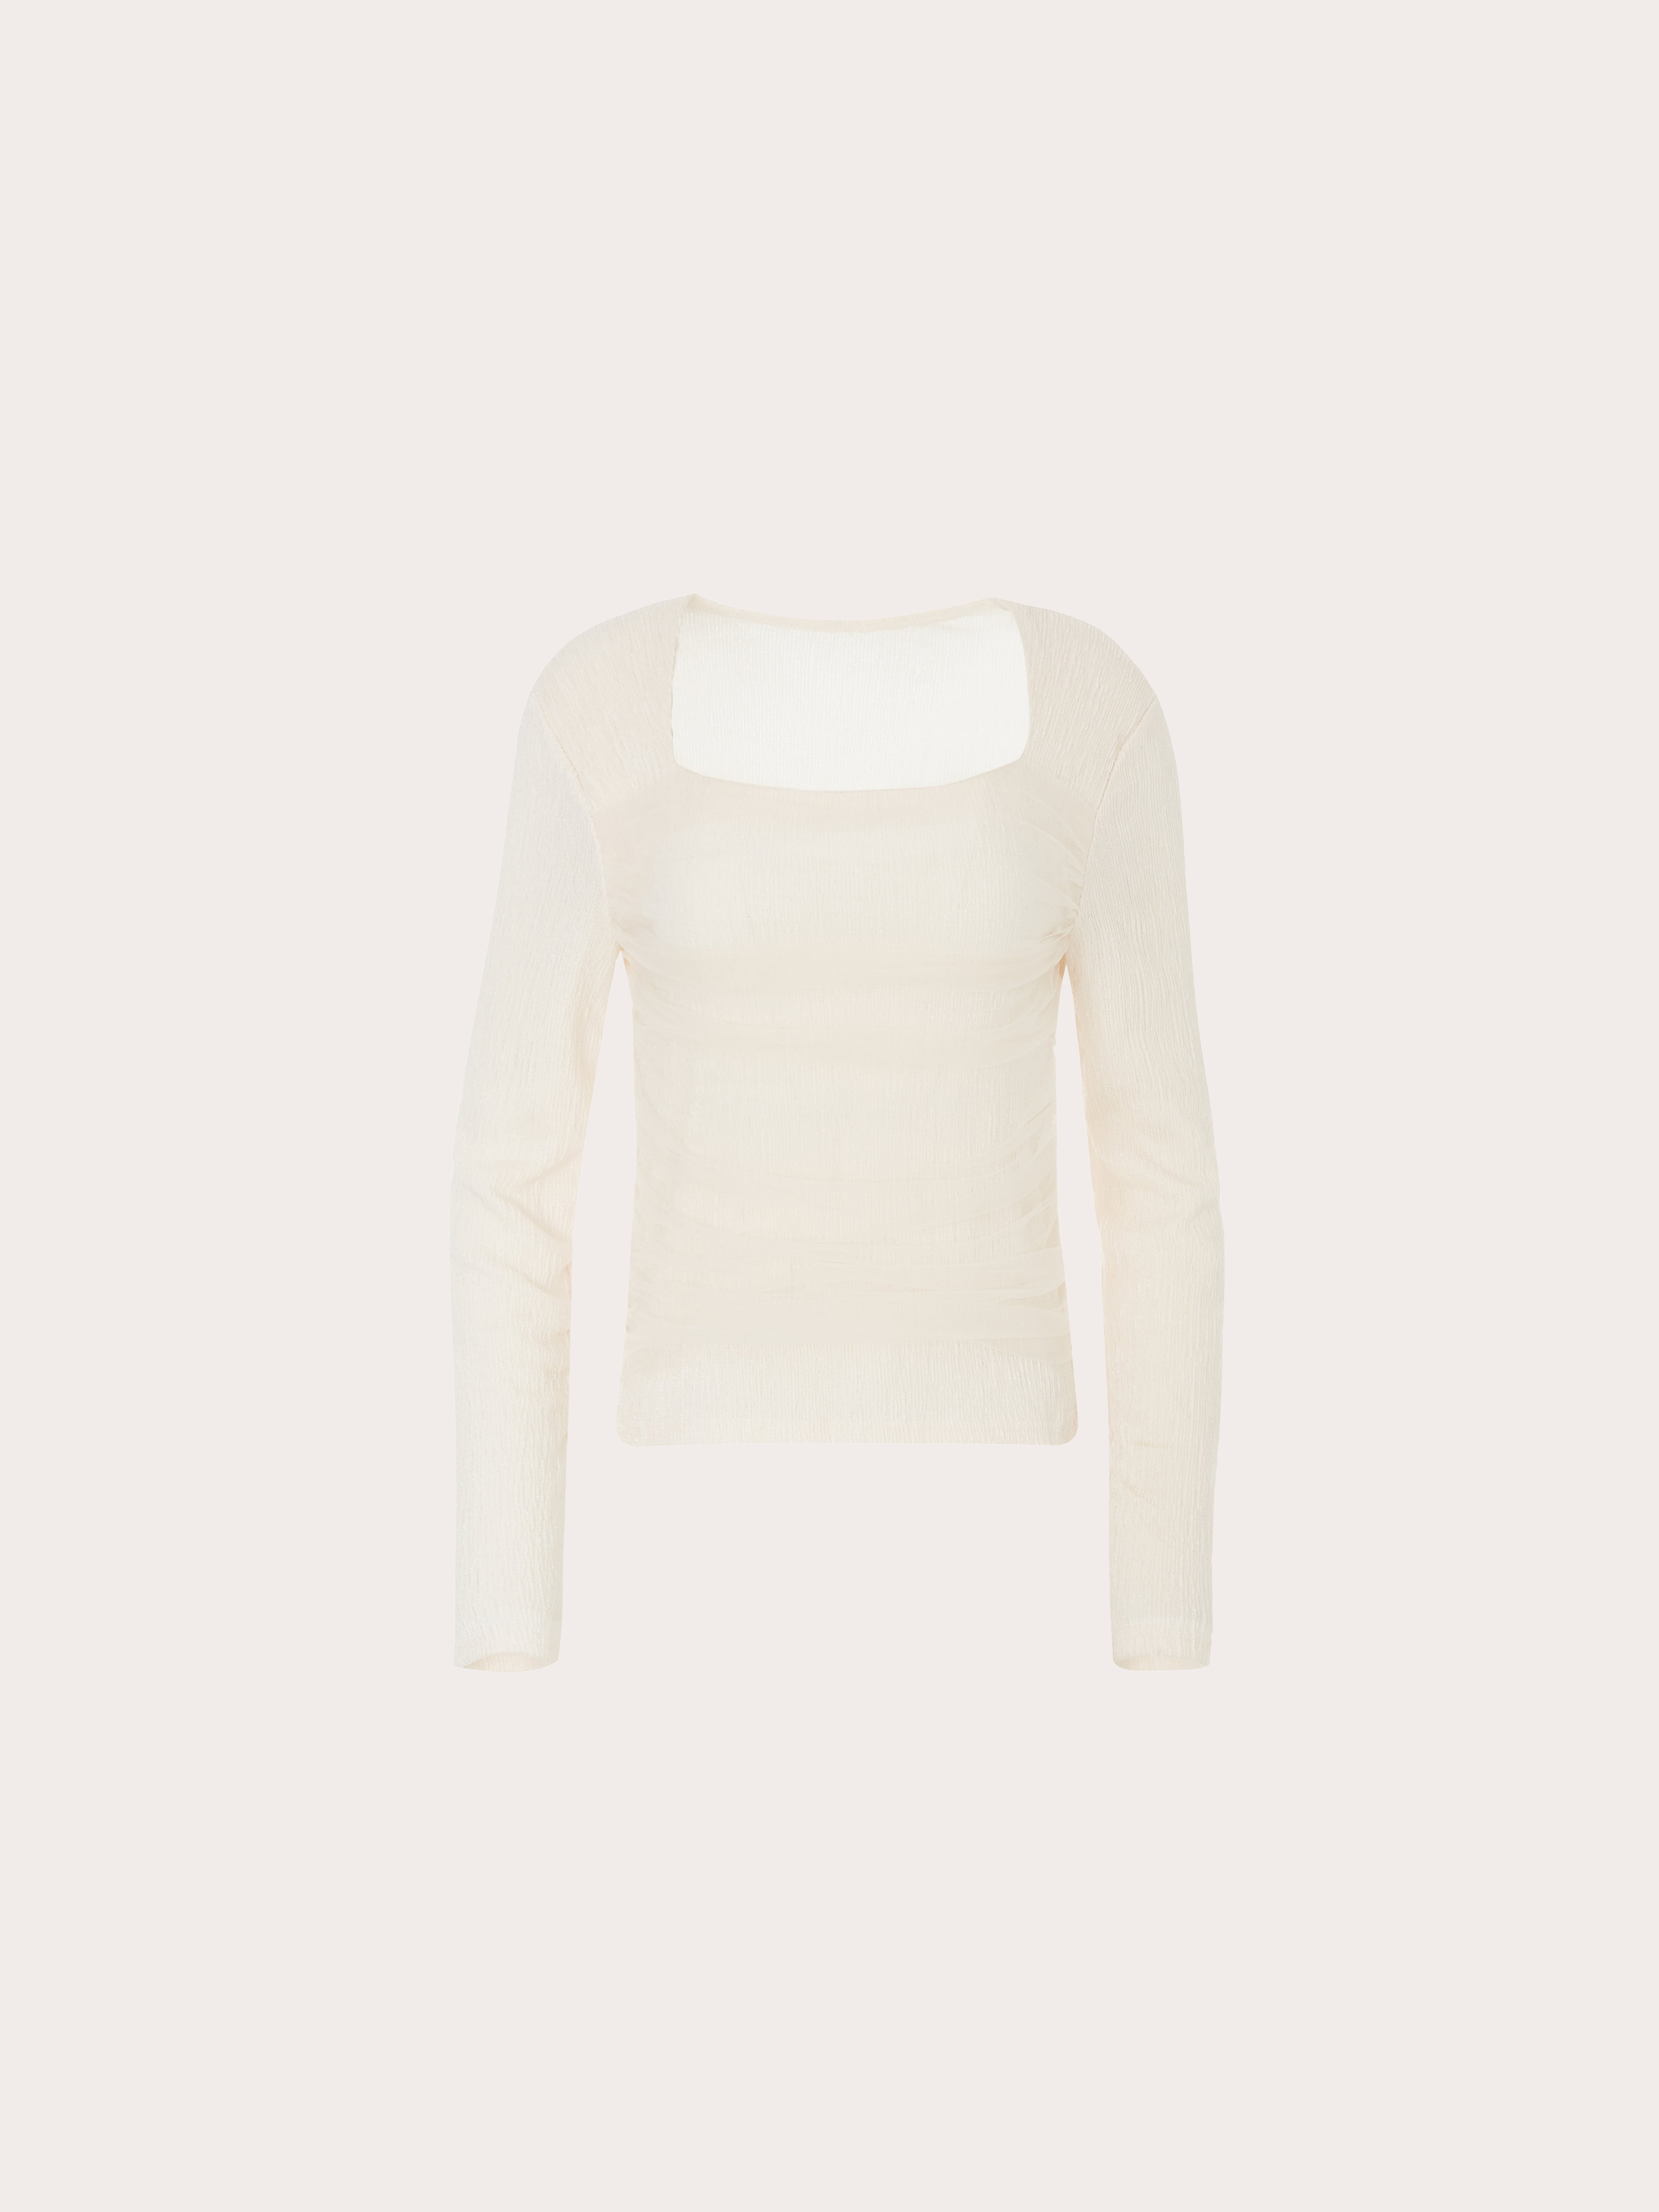 anne square tee - ivory